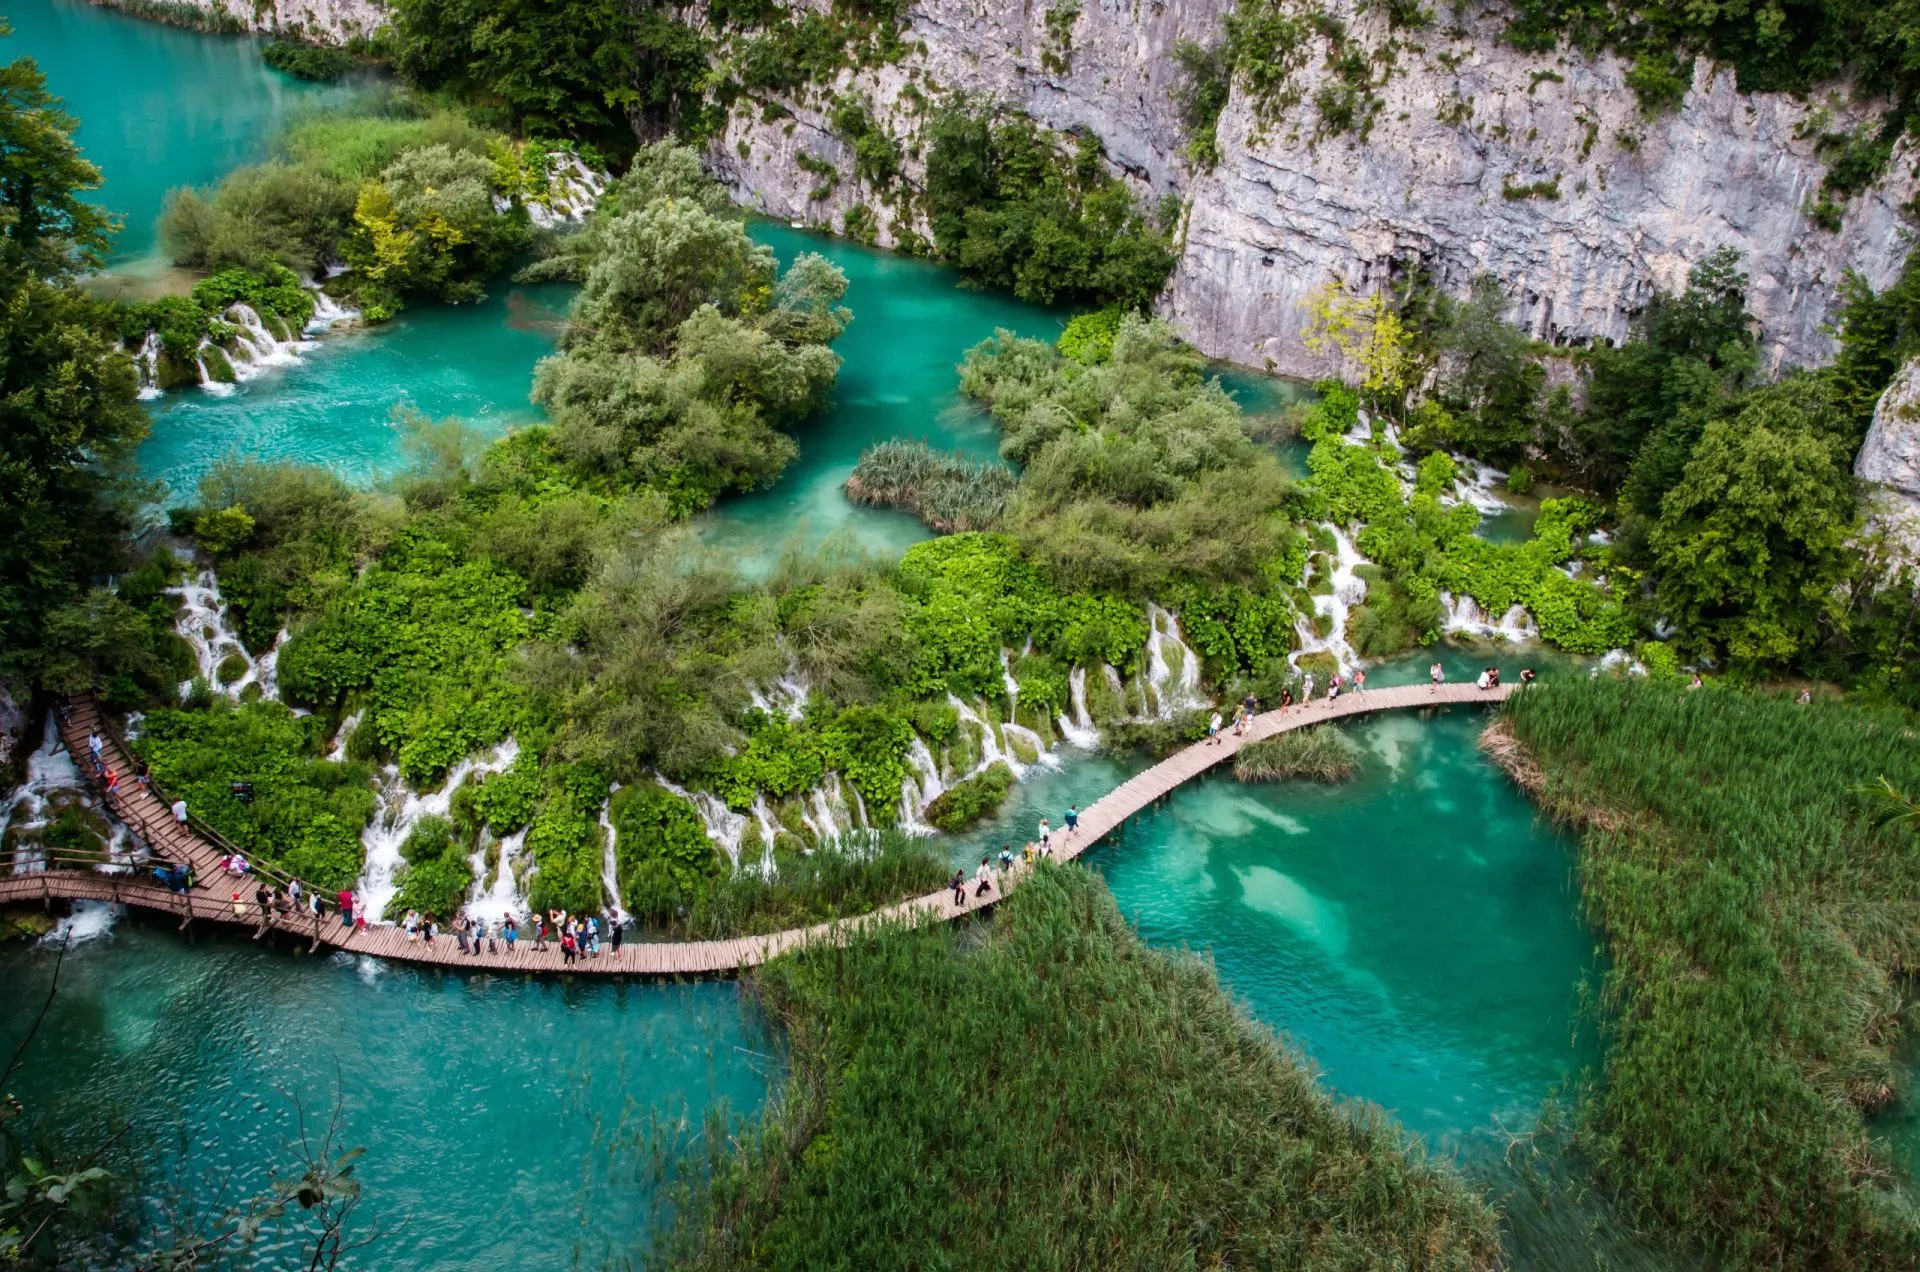 Plitvice National Park, Croatia. Wood plank path through green forest and over the water